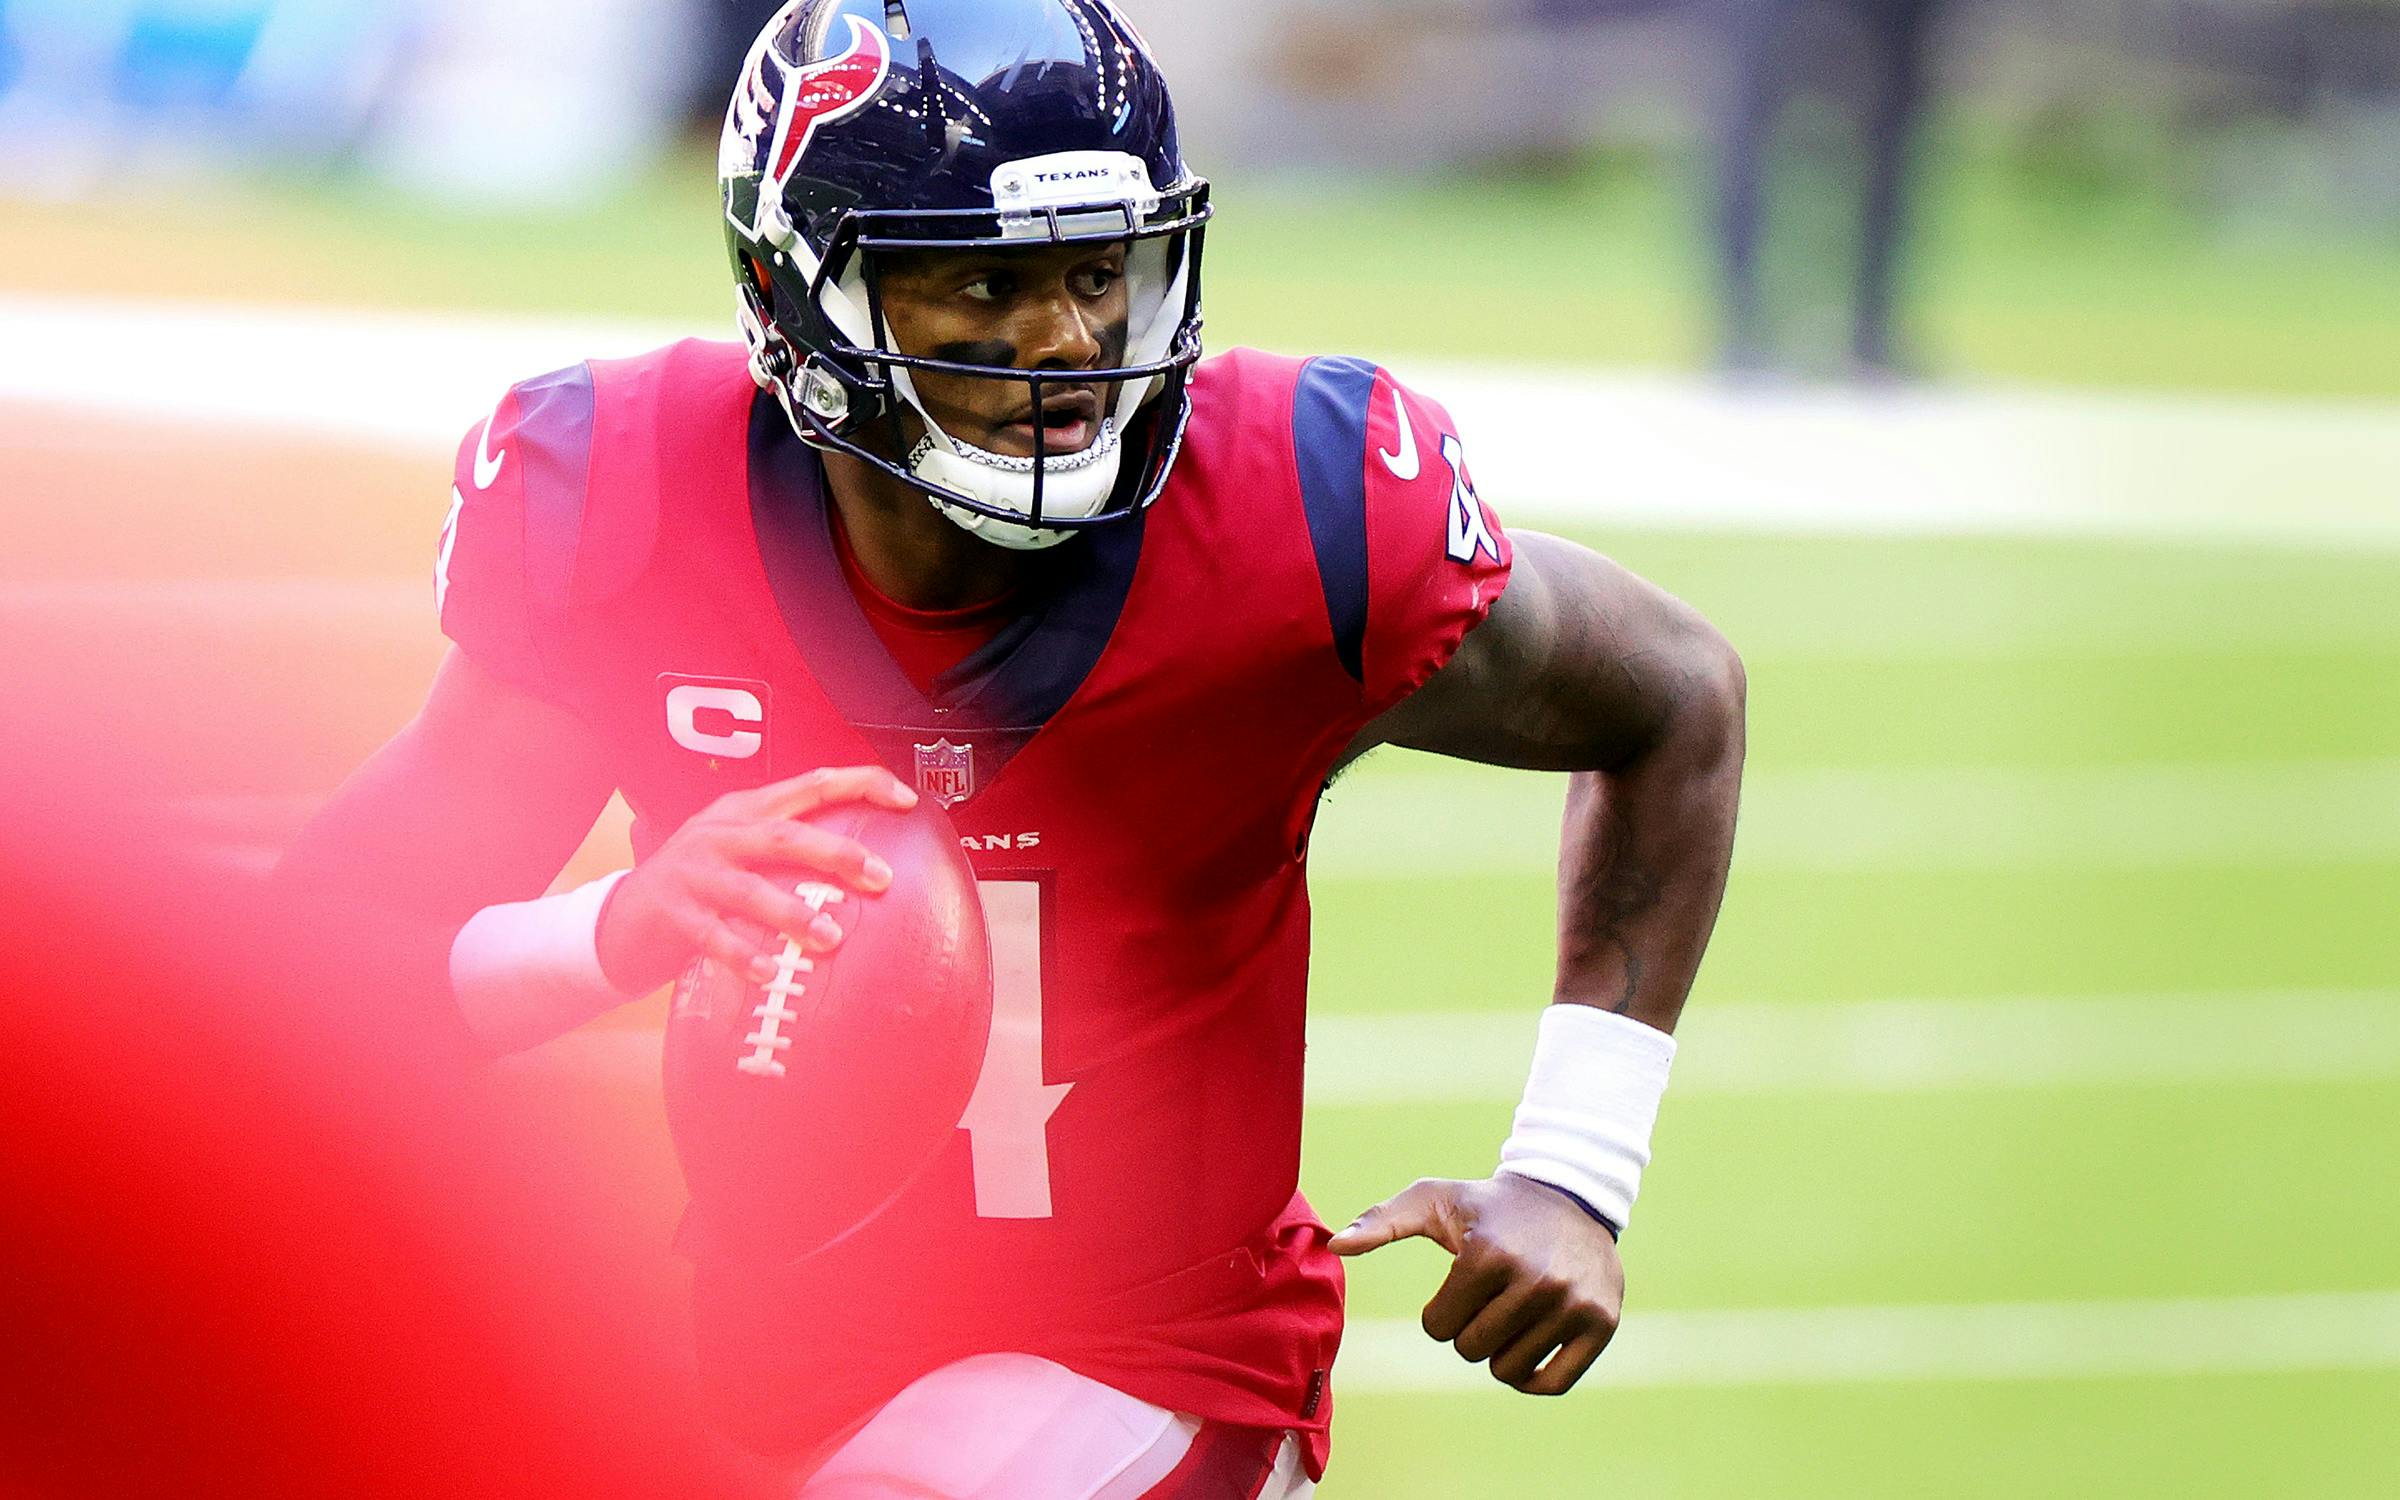 Houston Texans 24-21 Tennessee Titans: Deshaun Watson throws for two  touchdowns as Texans take control of AFC South, NFL News